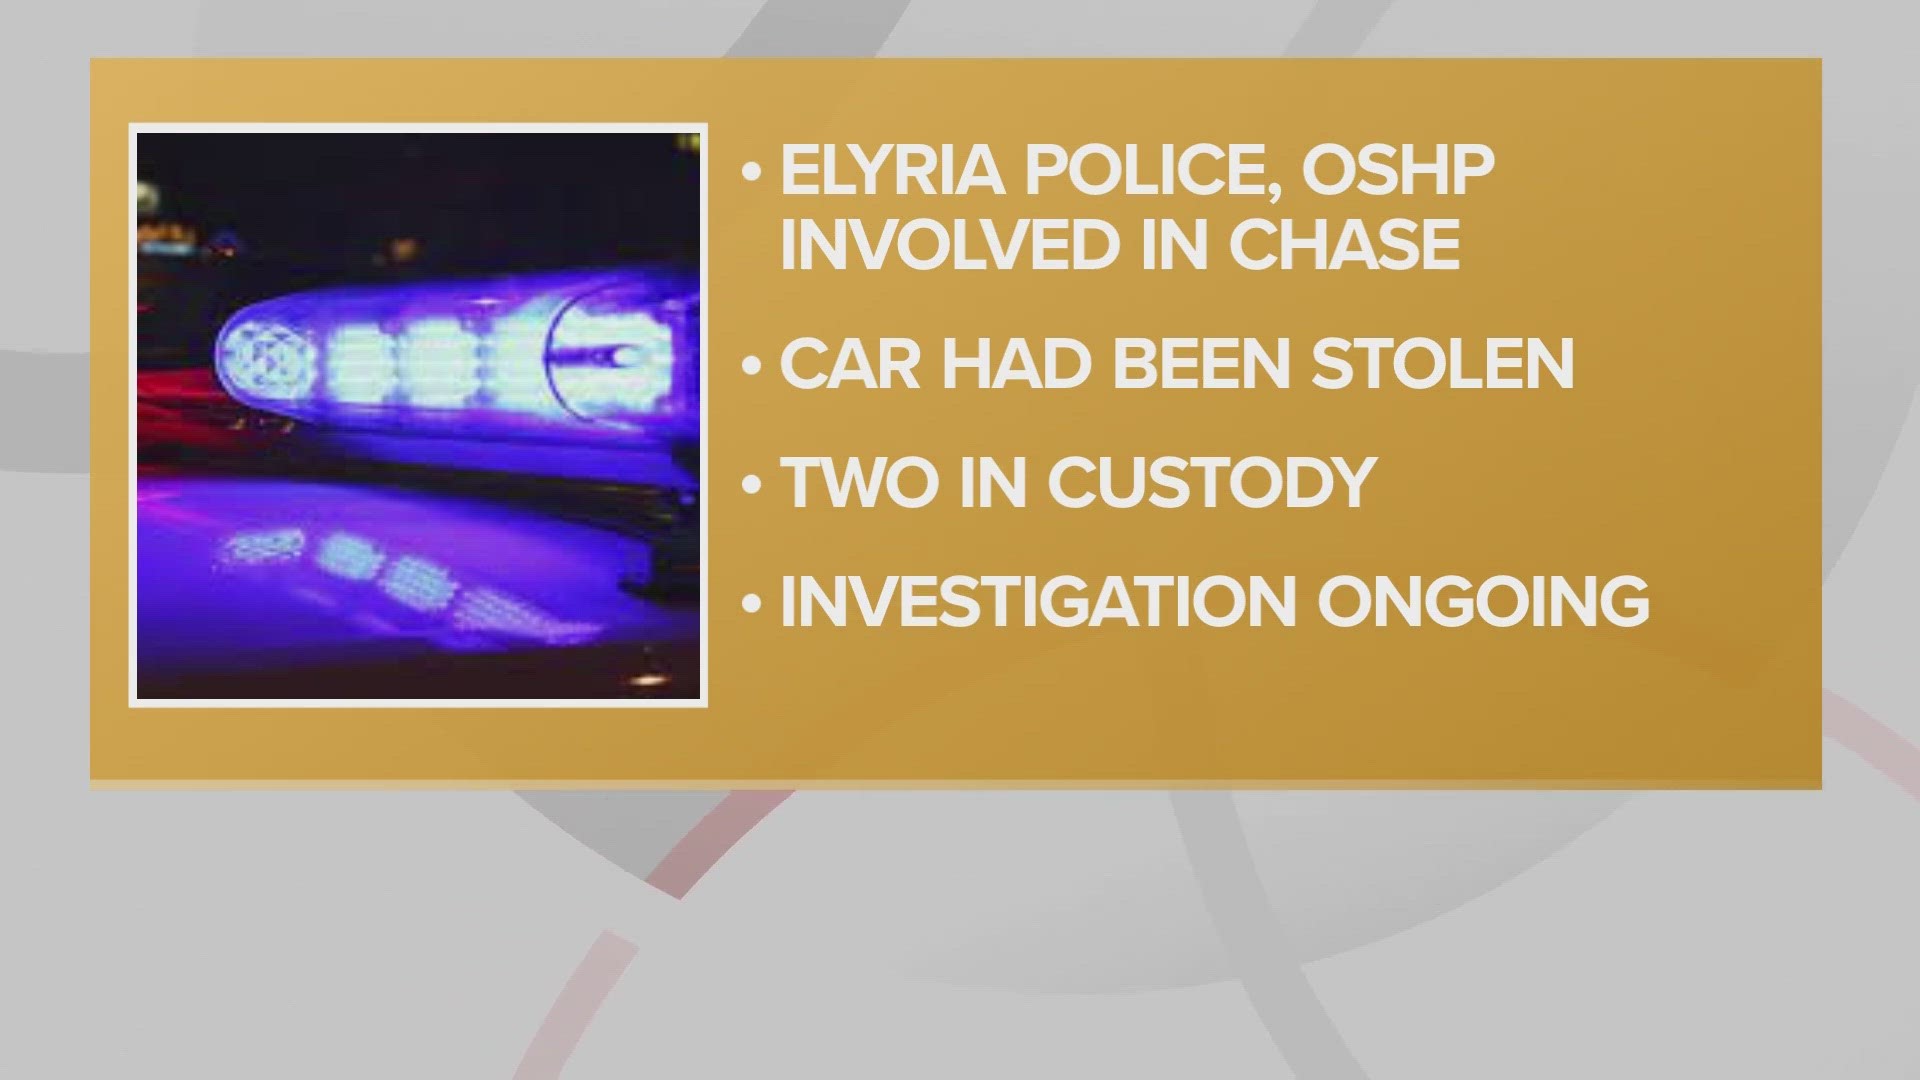 Police say the car had recently been reported as stolen out of Cleveland and allege the car had been taken at gunpoint.